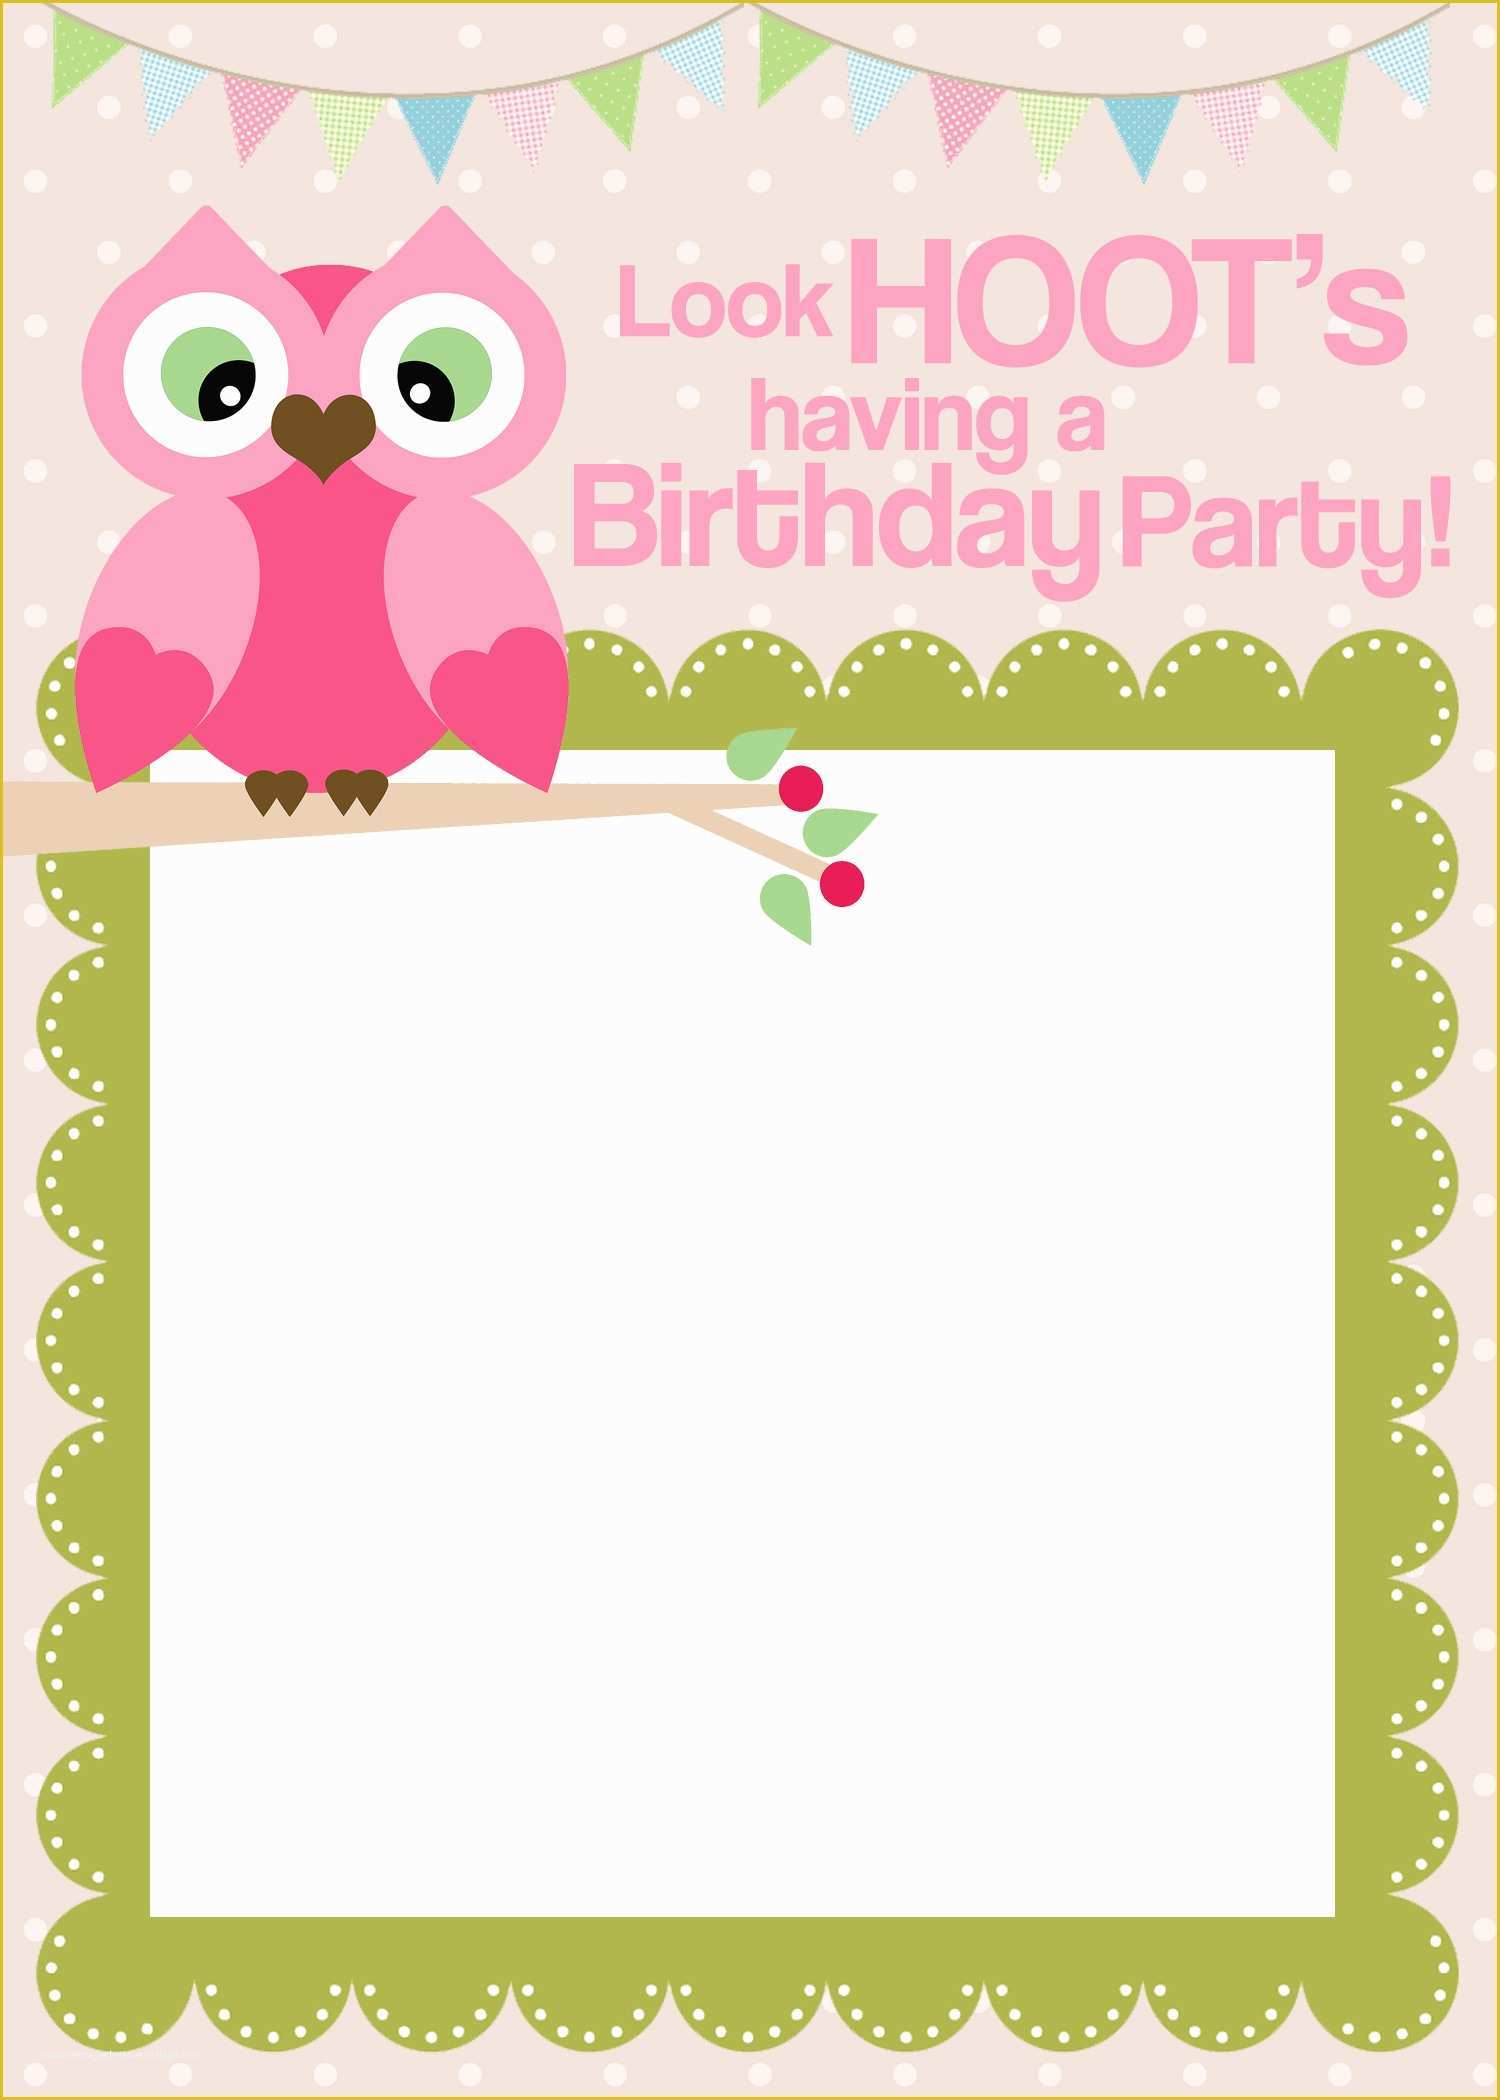 80's theme Party Invitation Templates Free Of Owl Birthday Party with Free Printables How to Nest for